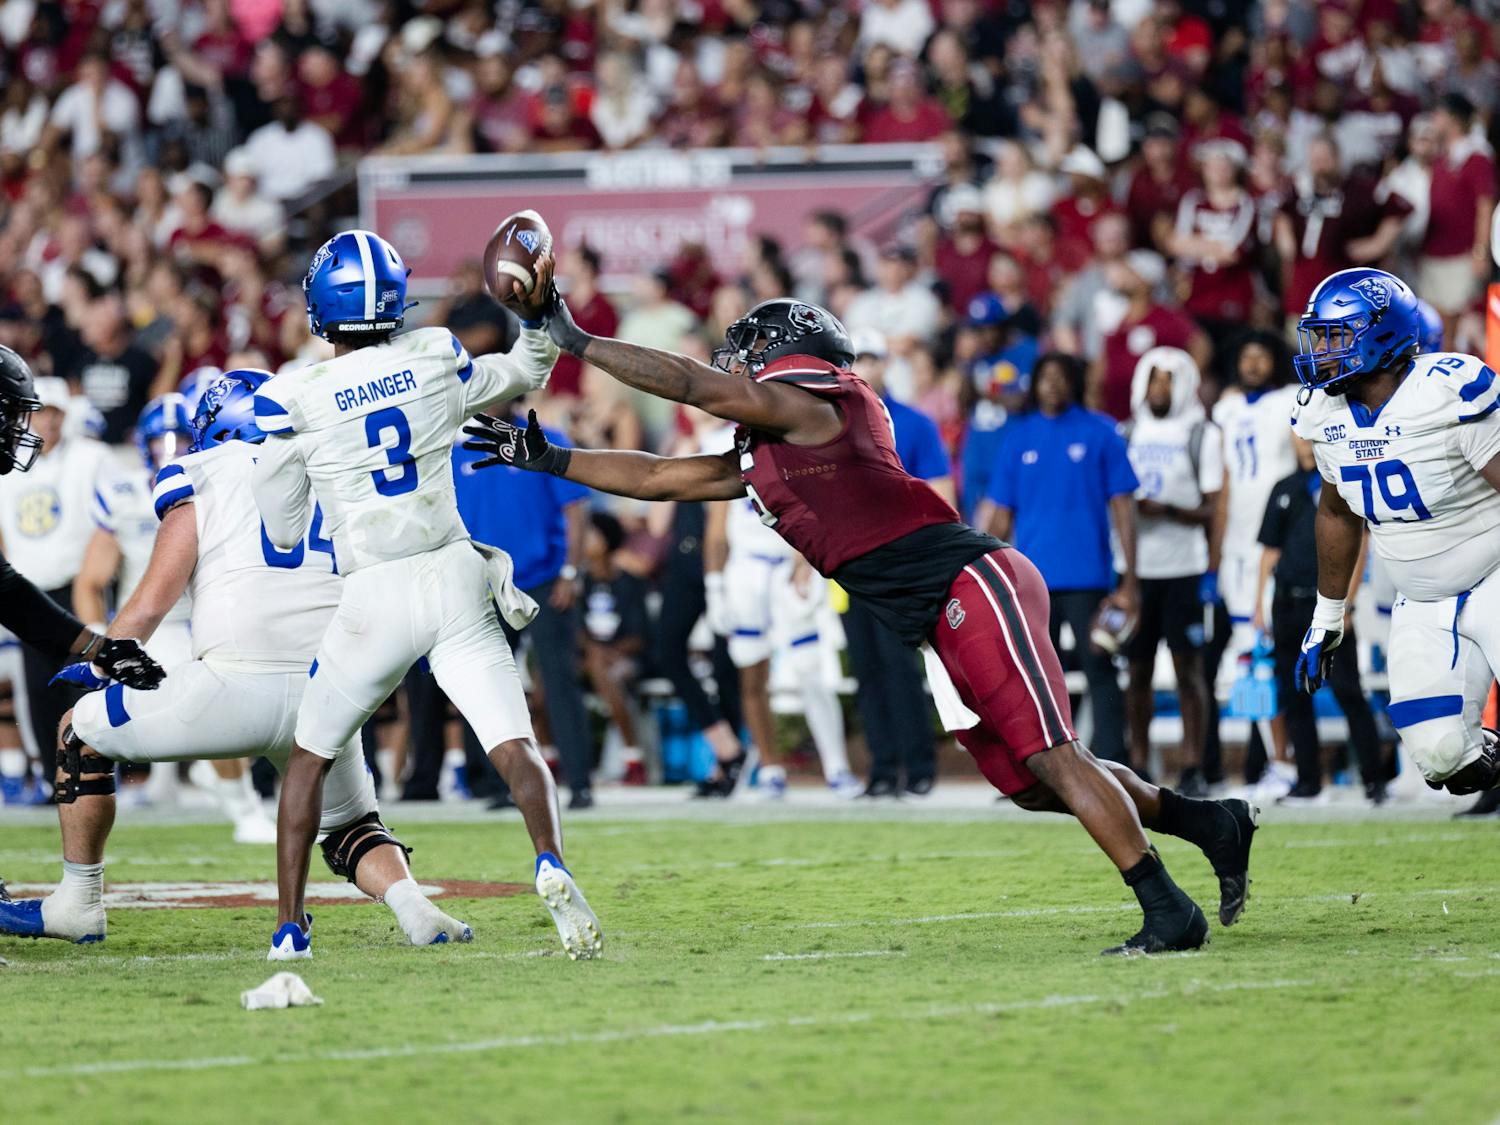 Junior edge rusher Jordan Burch reaches to knock the ball out of his opponent's hands during a game against Georgia State on Sept. 3, 2022. The Gamecocks won 35-14. &nbsp;